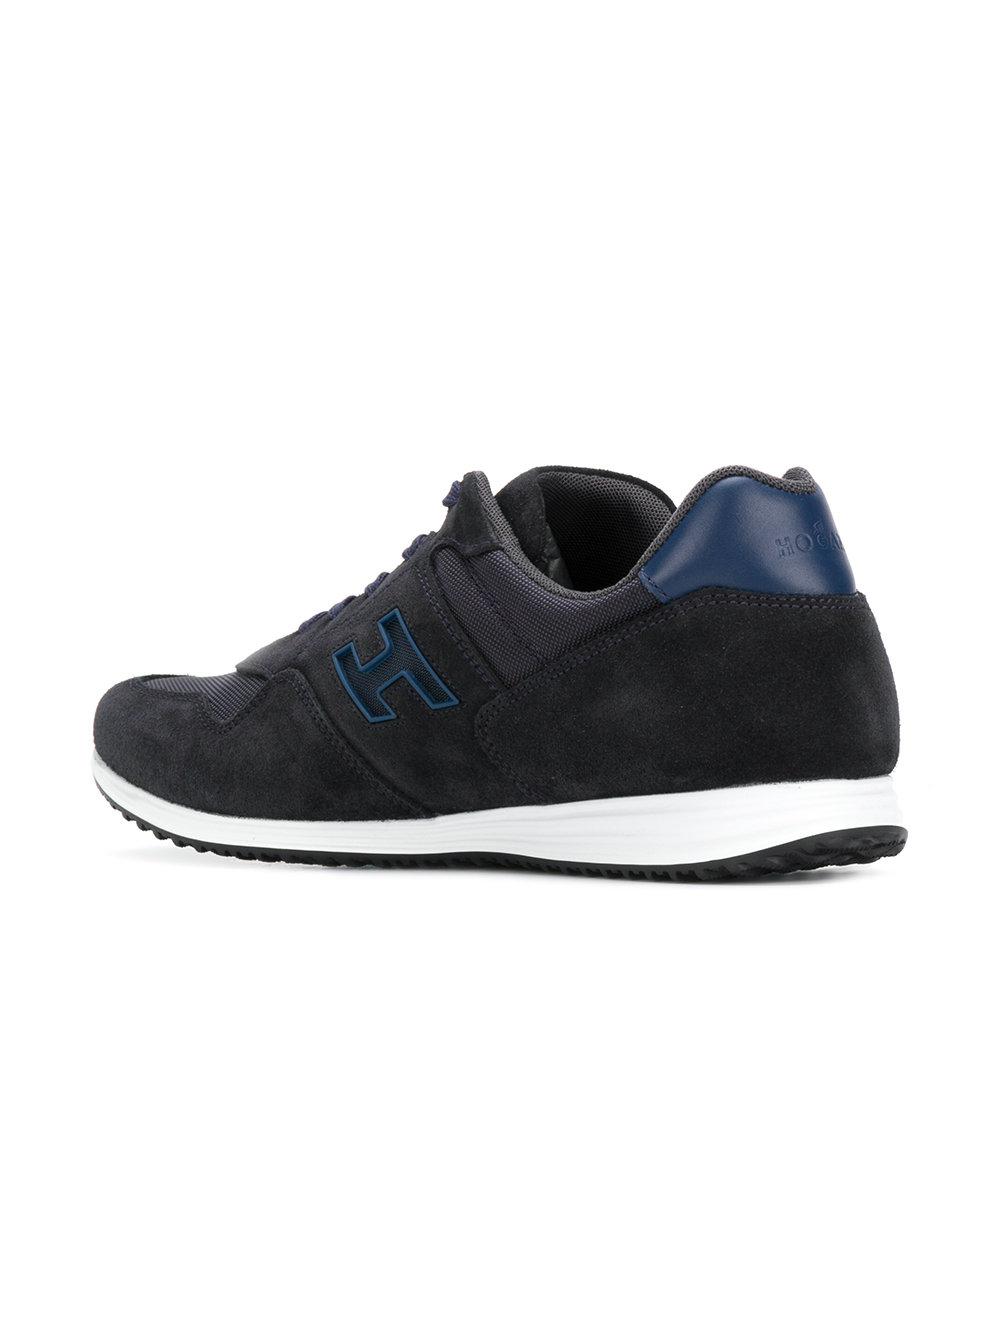 Hogan Leather Olympia X H205 Sneakers in Blue for Men - Lyst